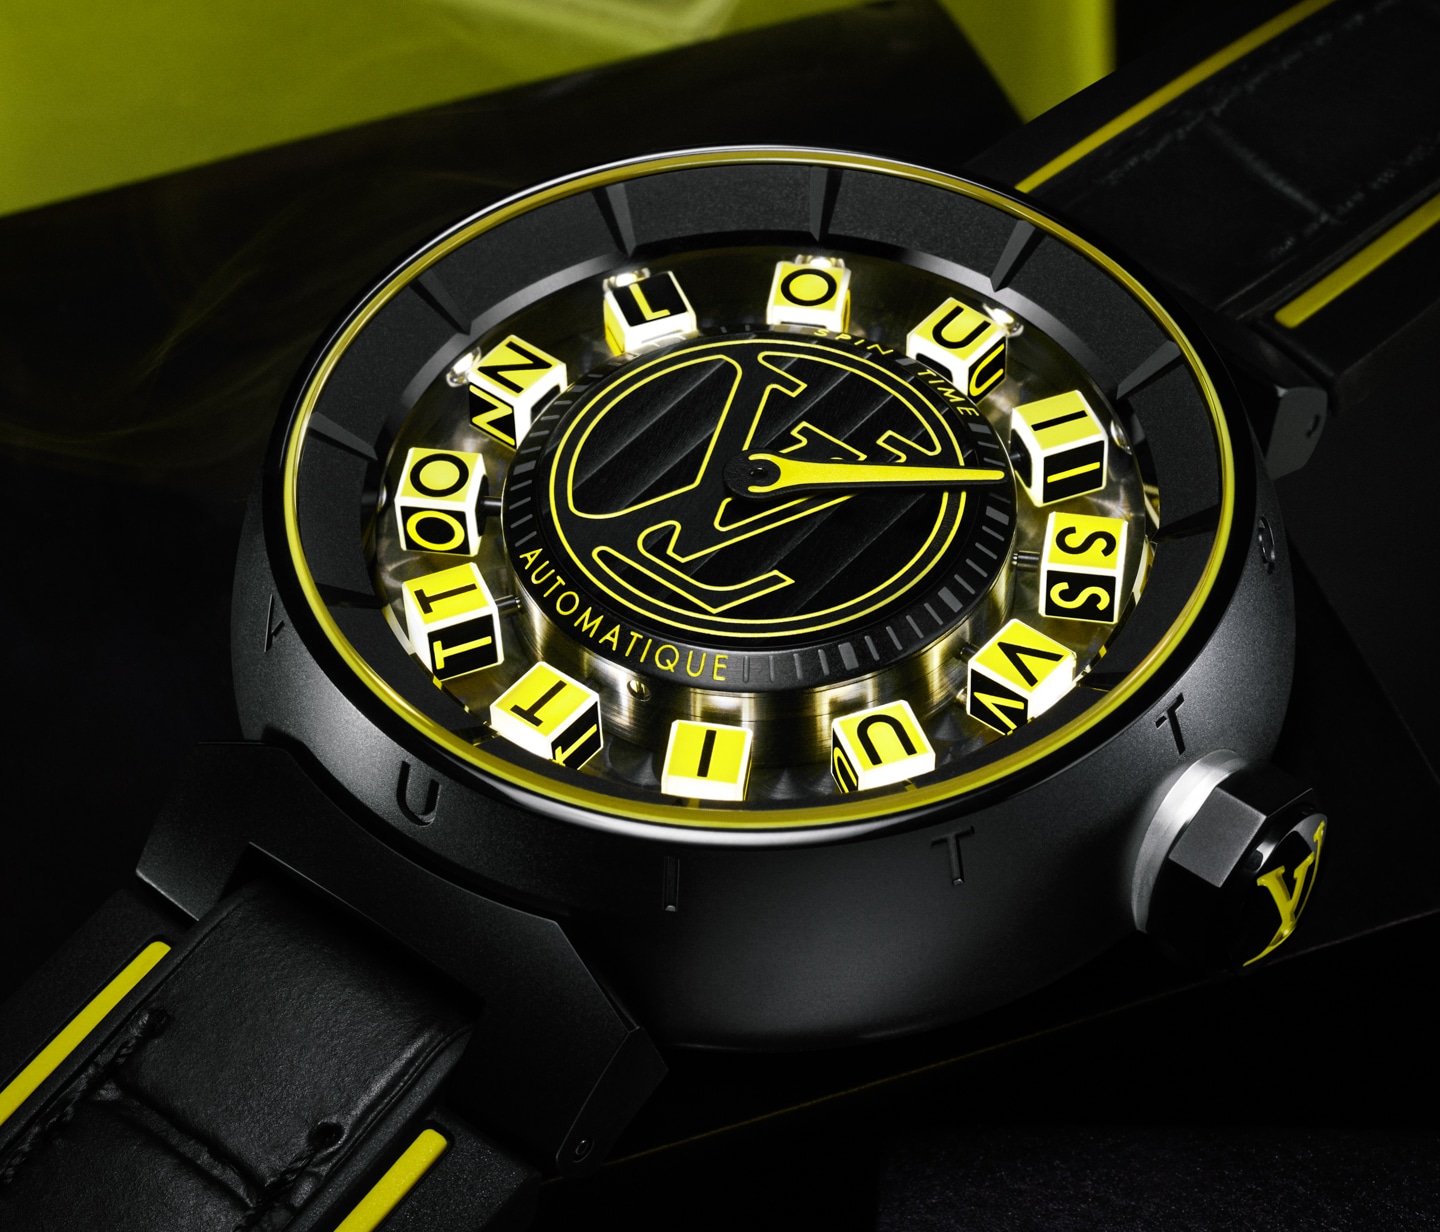 Louis Vuitton revisits the Tambour Spin Time Air watch to